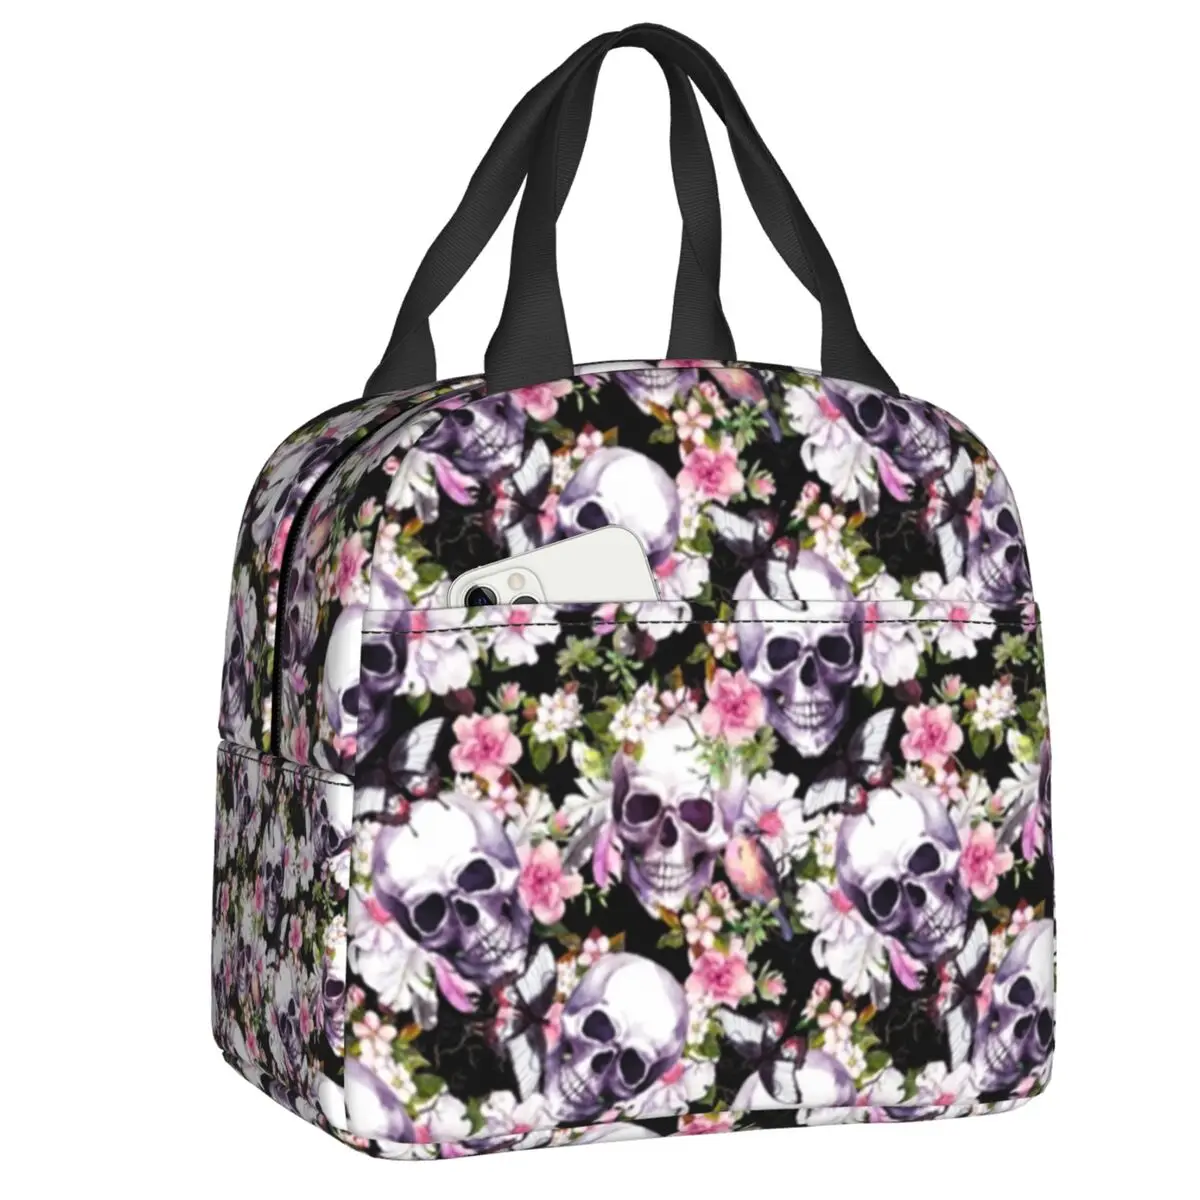 

Floral Skulls Pattern Insulated Lunch Bag for Women Leakproof Cooler Thermal Lunch Tote Office Work School